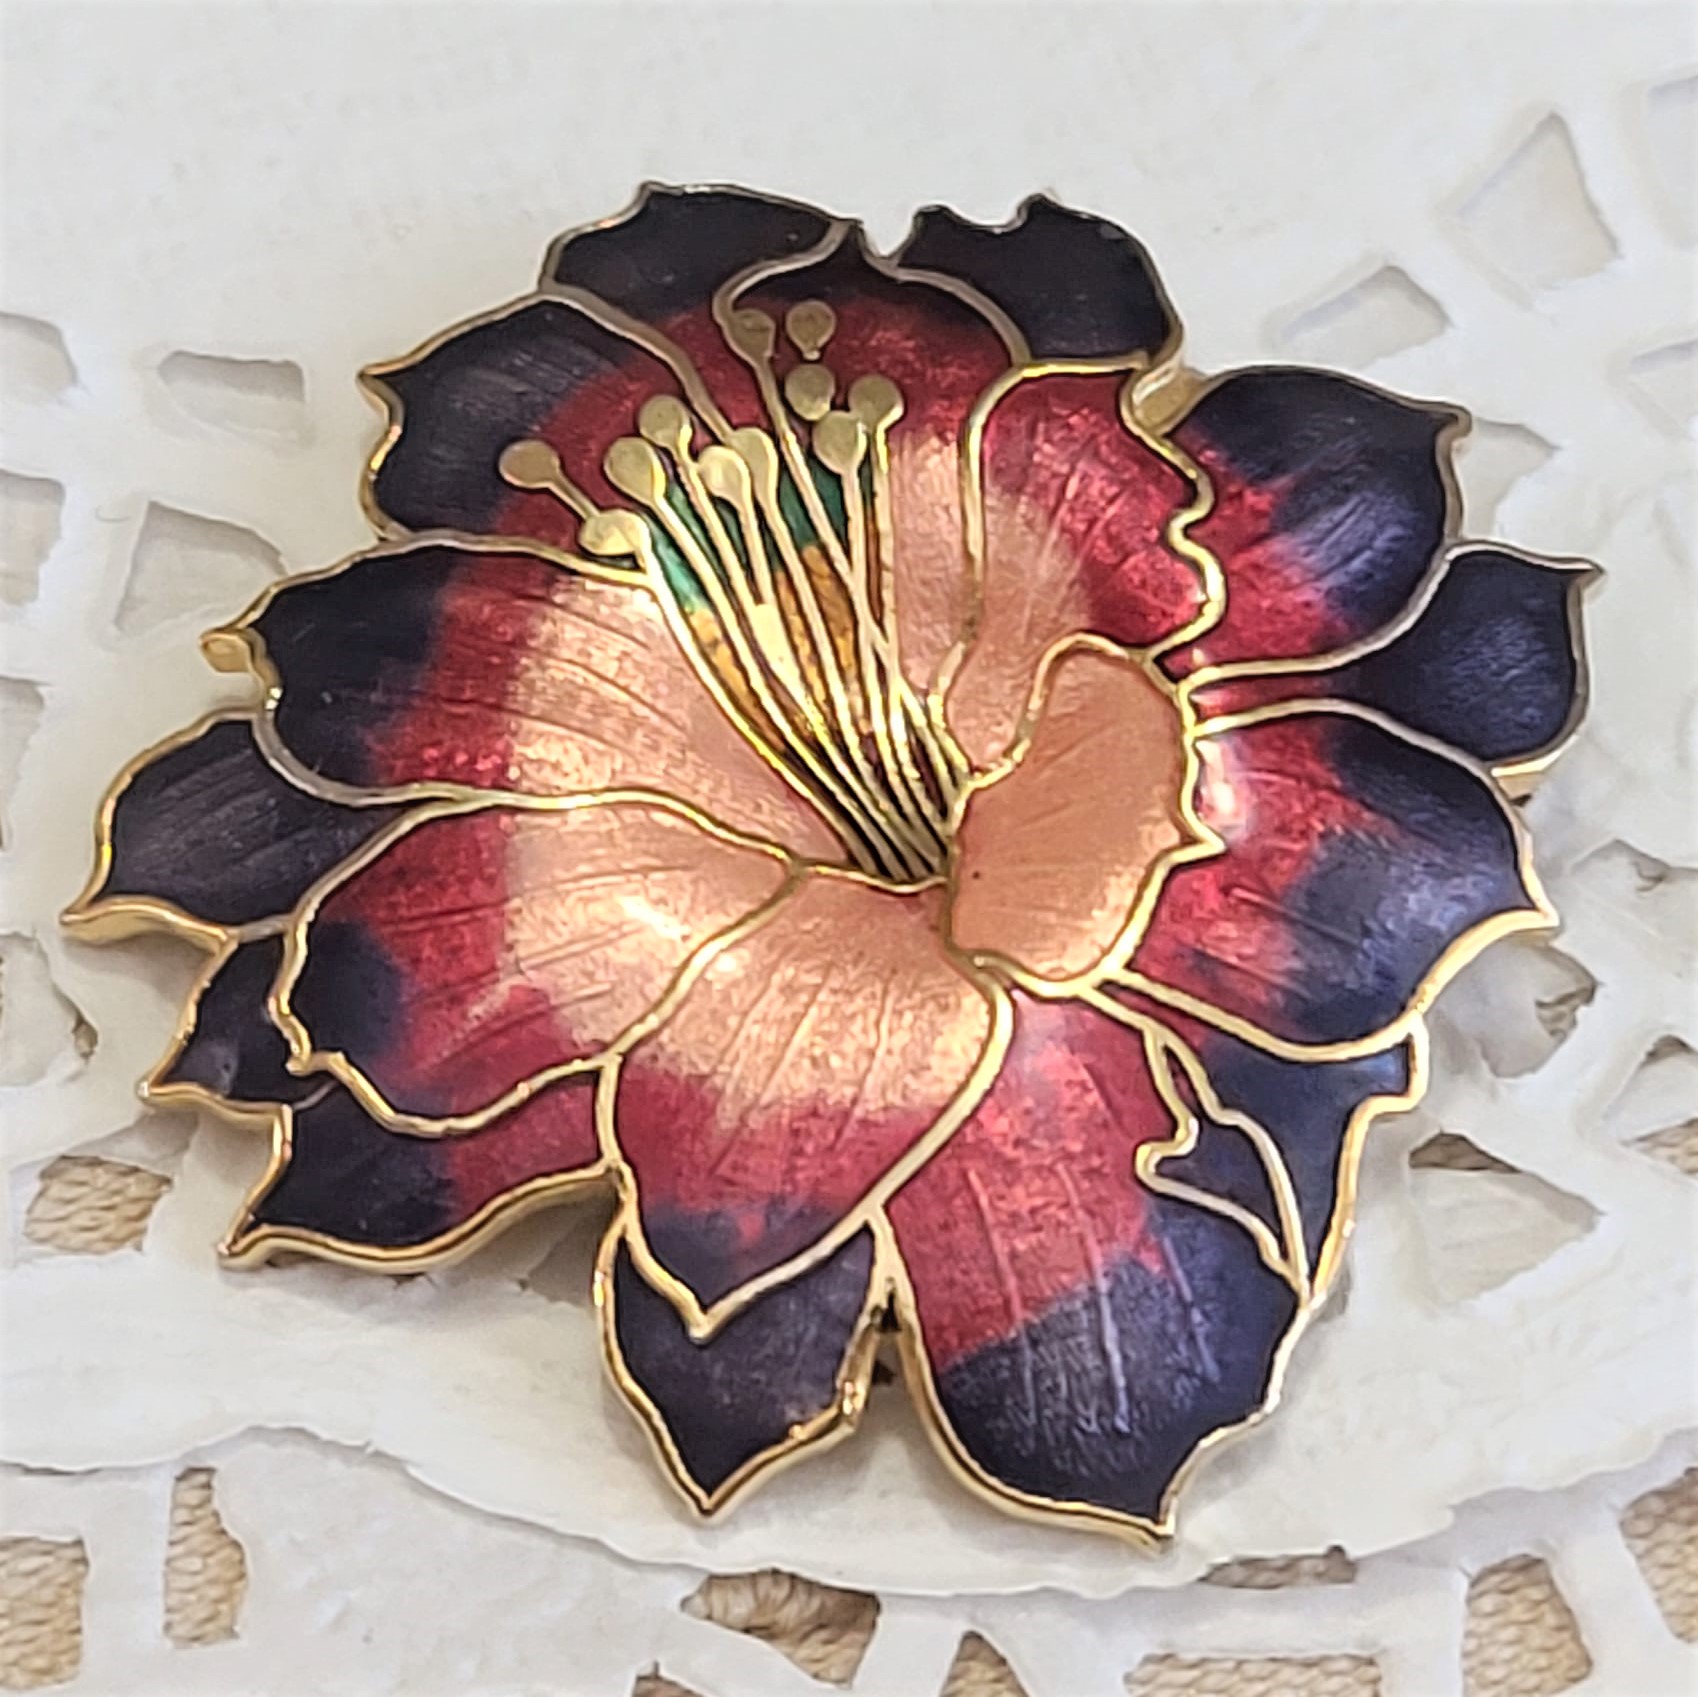 Cloisonne flower purple and pink brooch pin